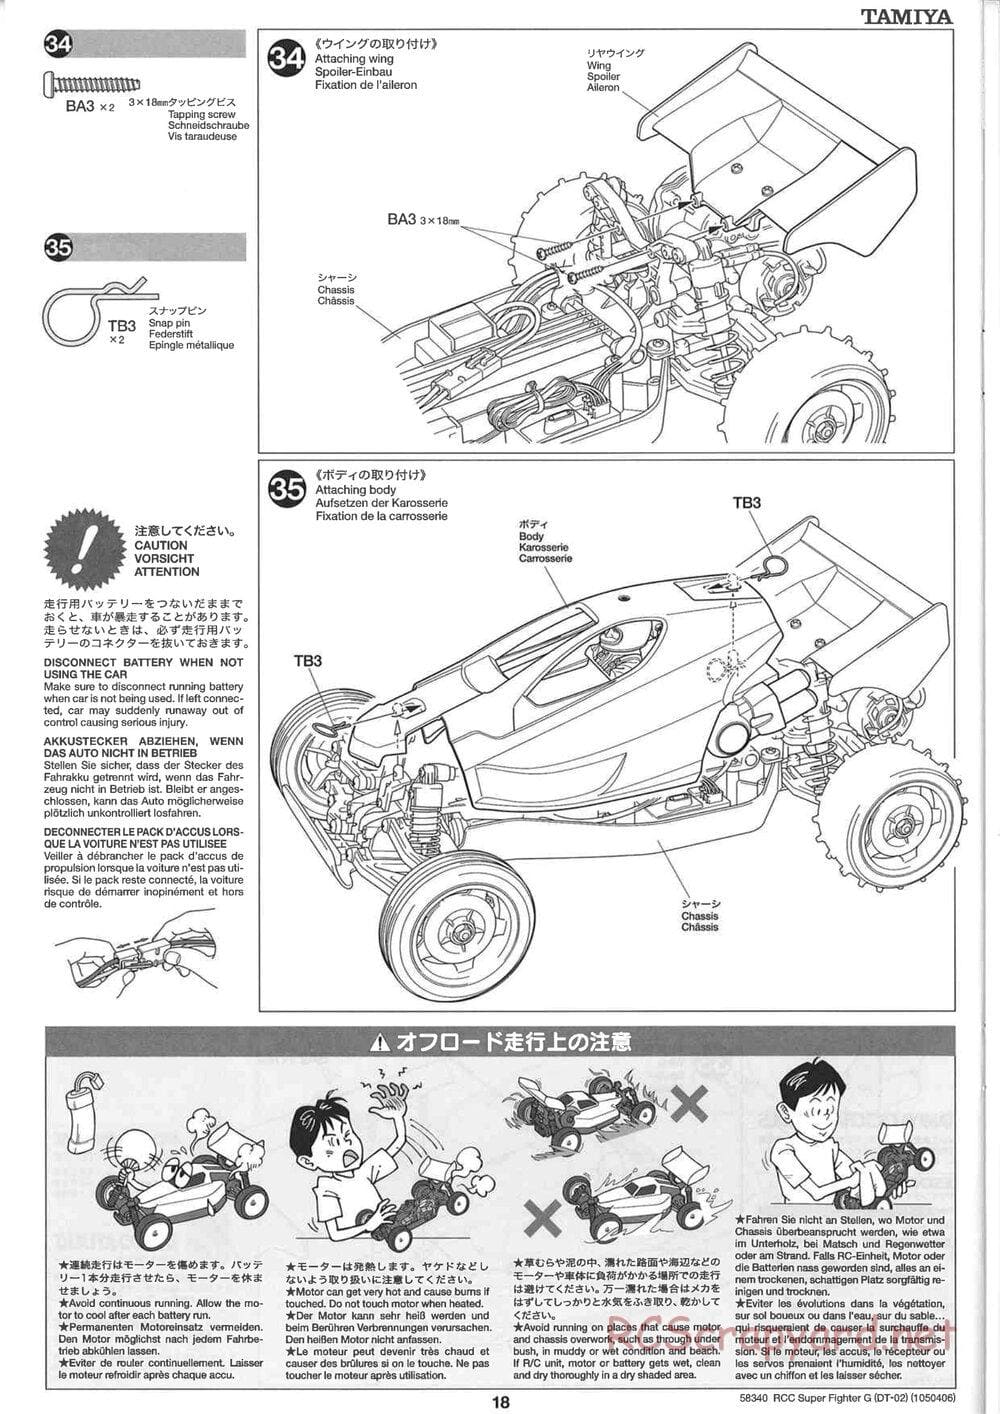 Tamiya - Super Fighter G Chassis - Manual - Page 18